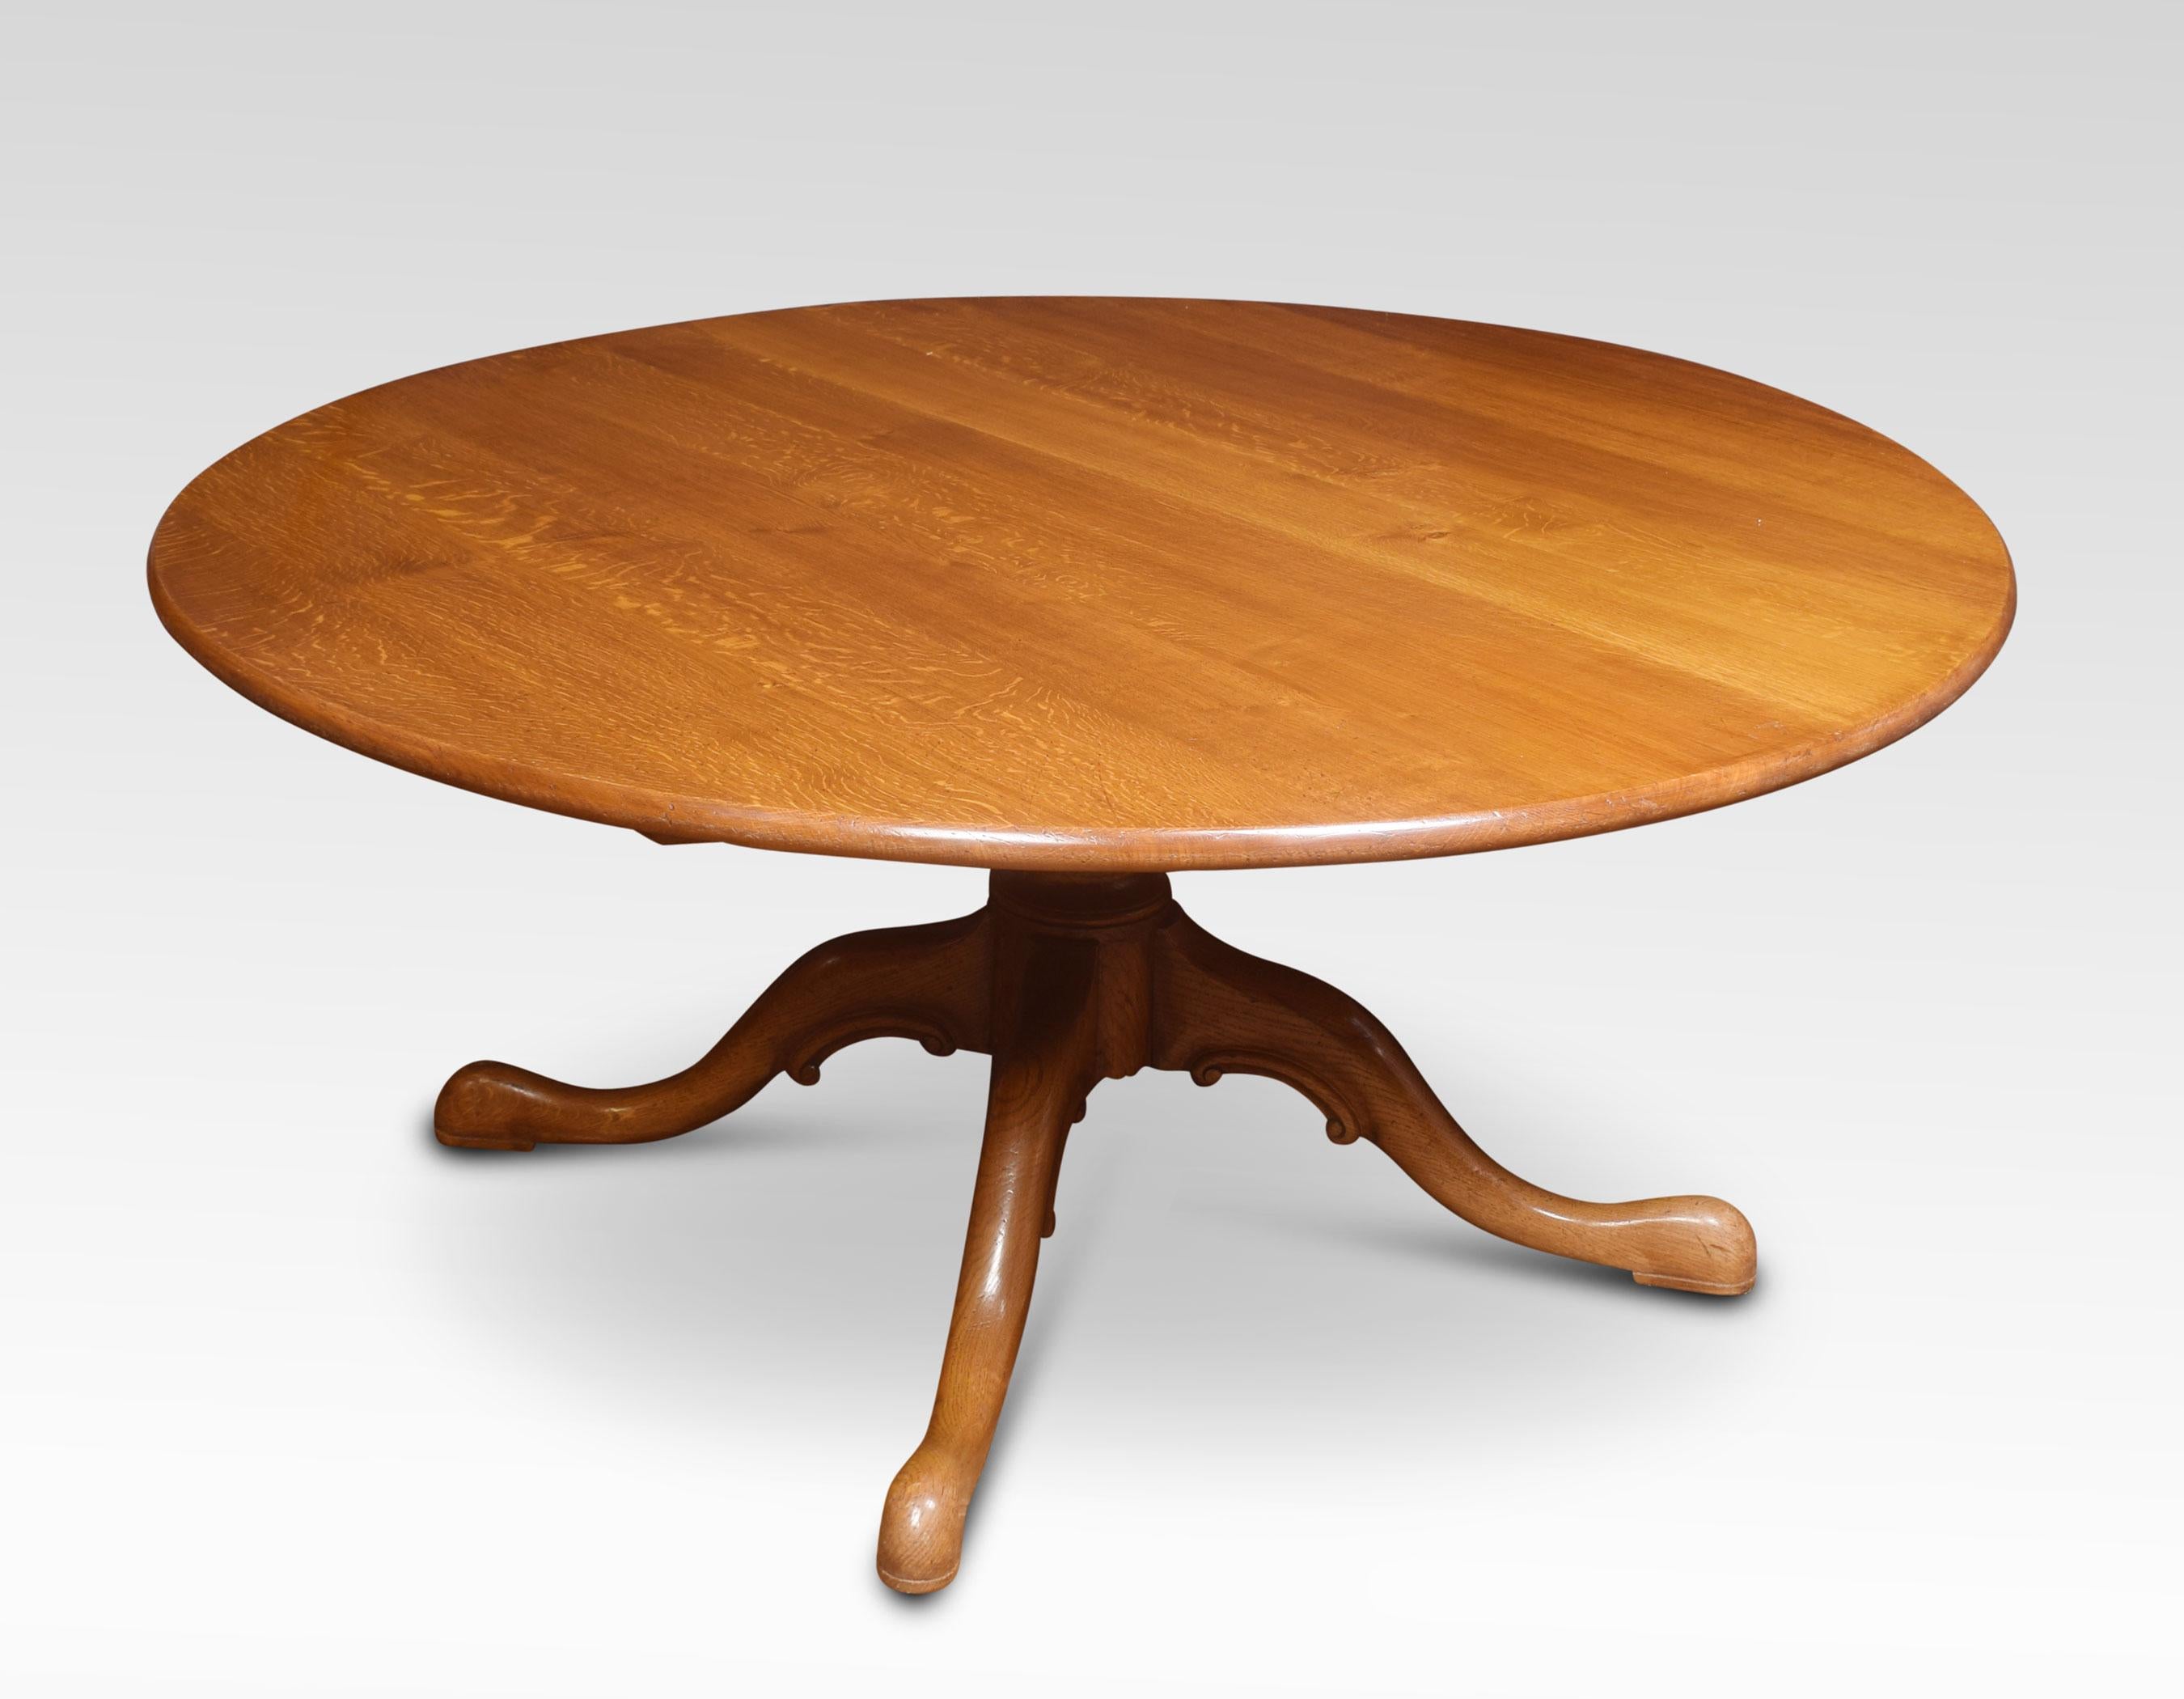 George III style oak dining table, the large circular top above a ring turned pedestal. All raised up on four down swept supports.
Dimensions:
Height 29.5 inches
Width 66 inches
Depth 66 inches.